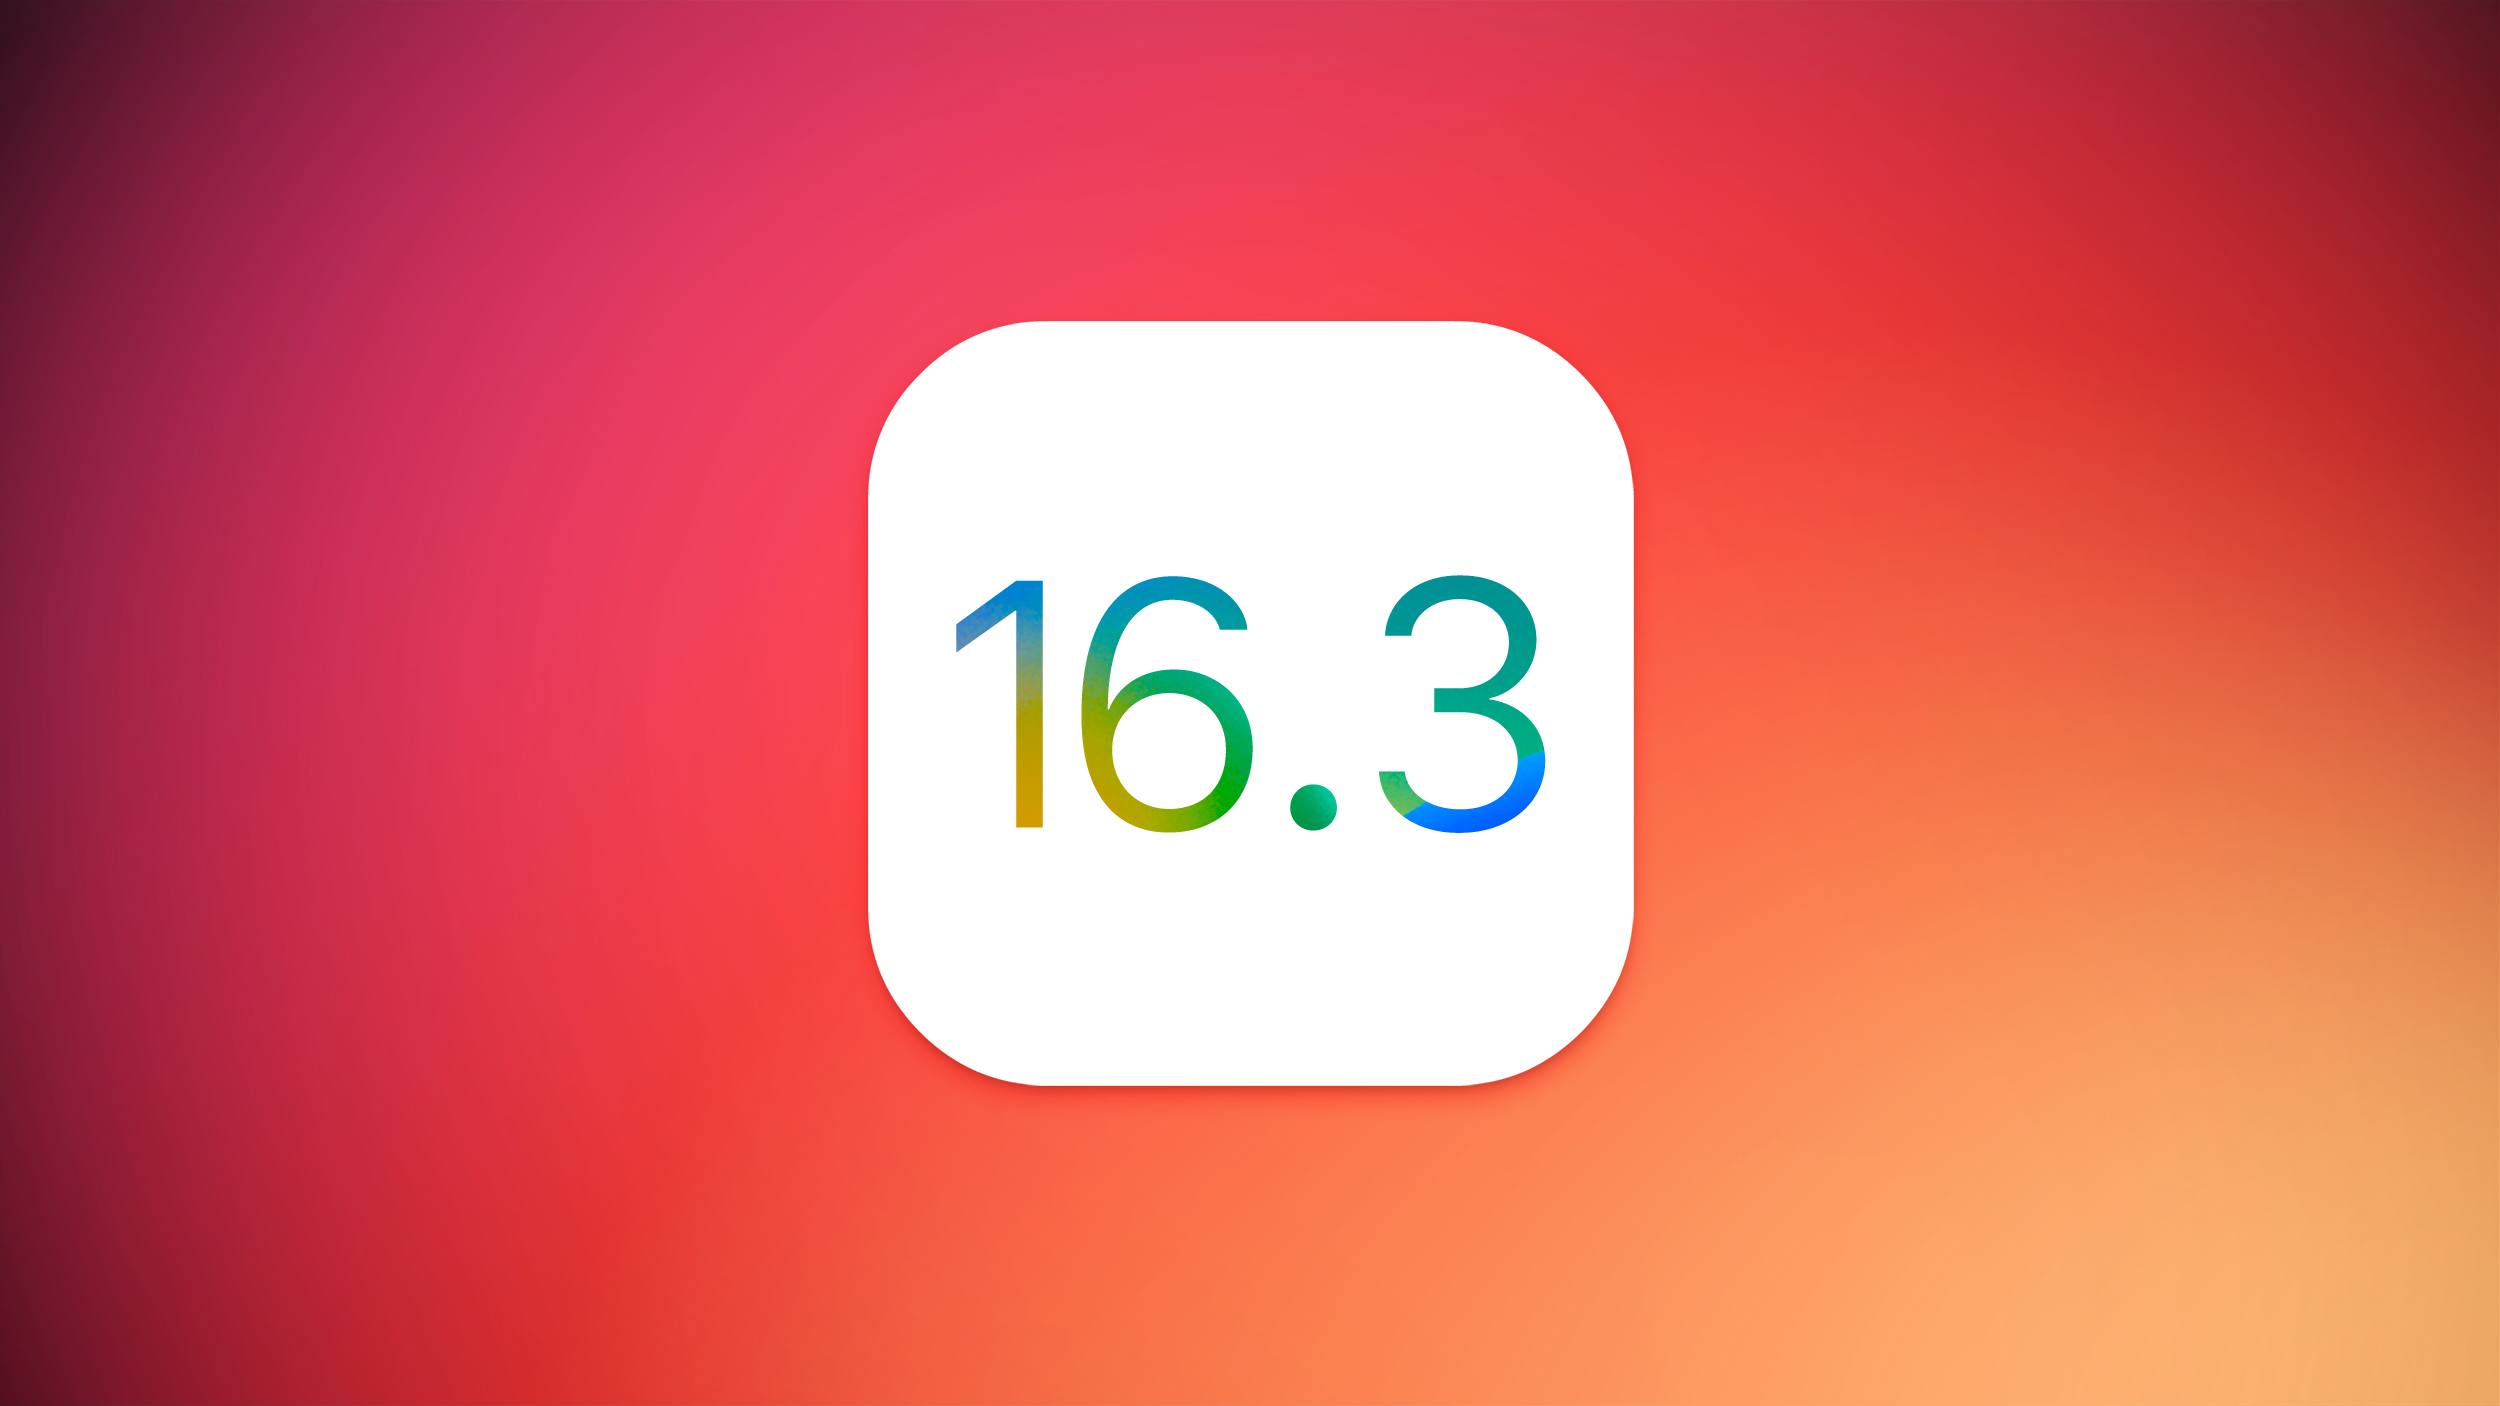 Apple Stops Signing iOS 16.3 Following iOS 16.3.1 Launch, Downgrading No Longer Possible